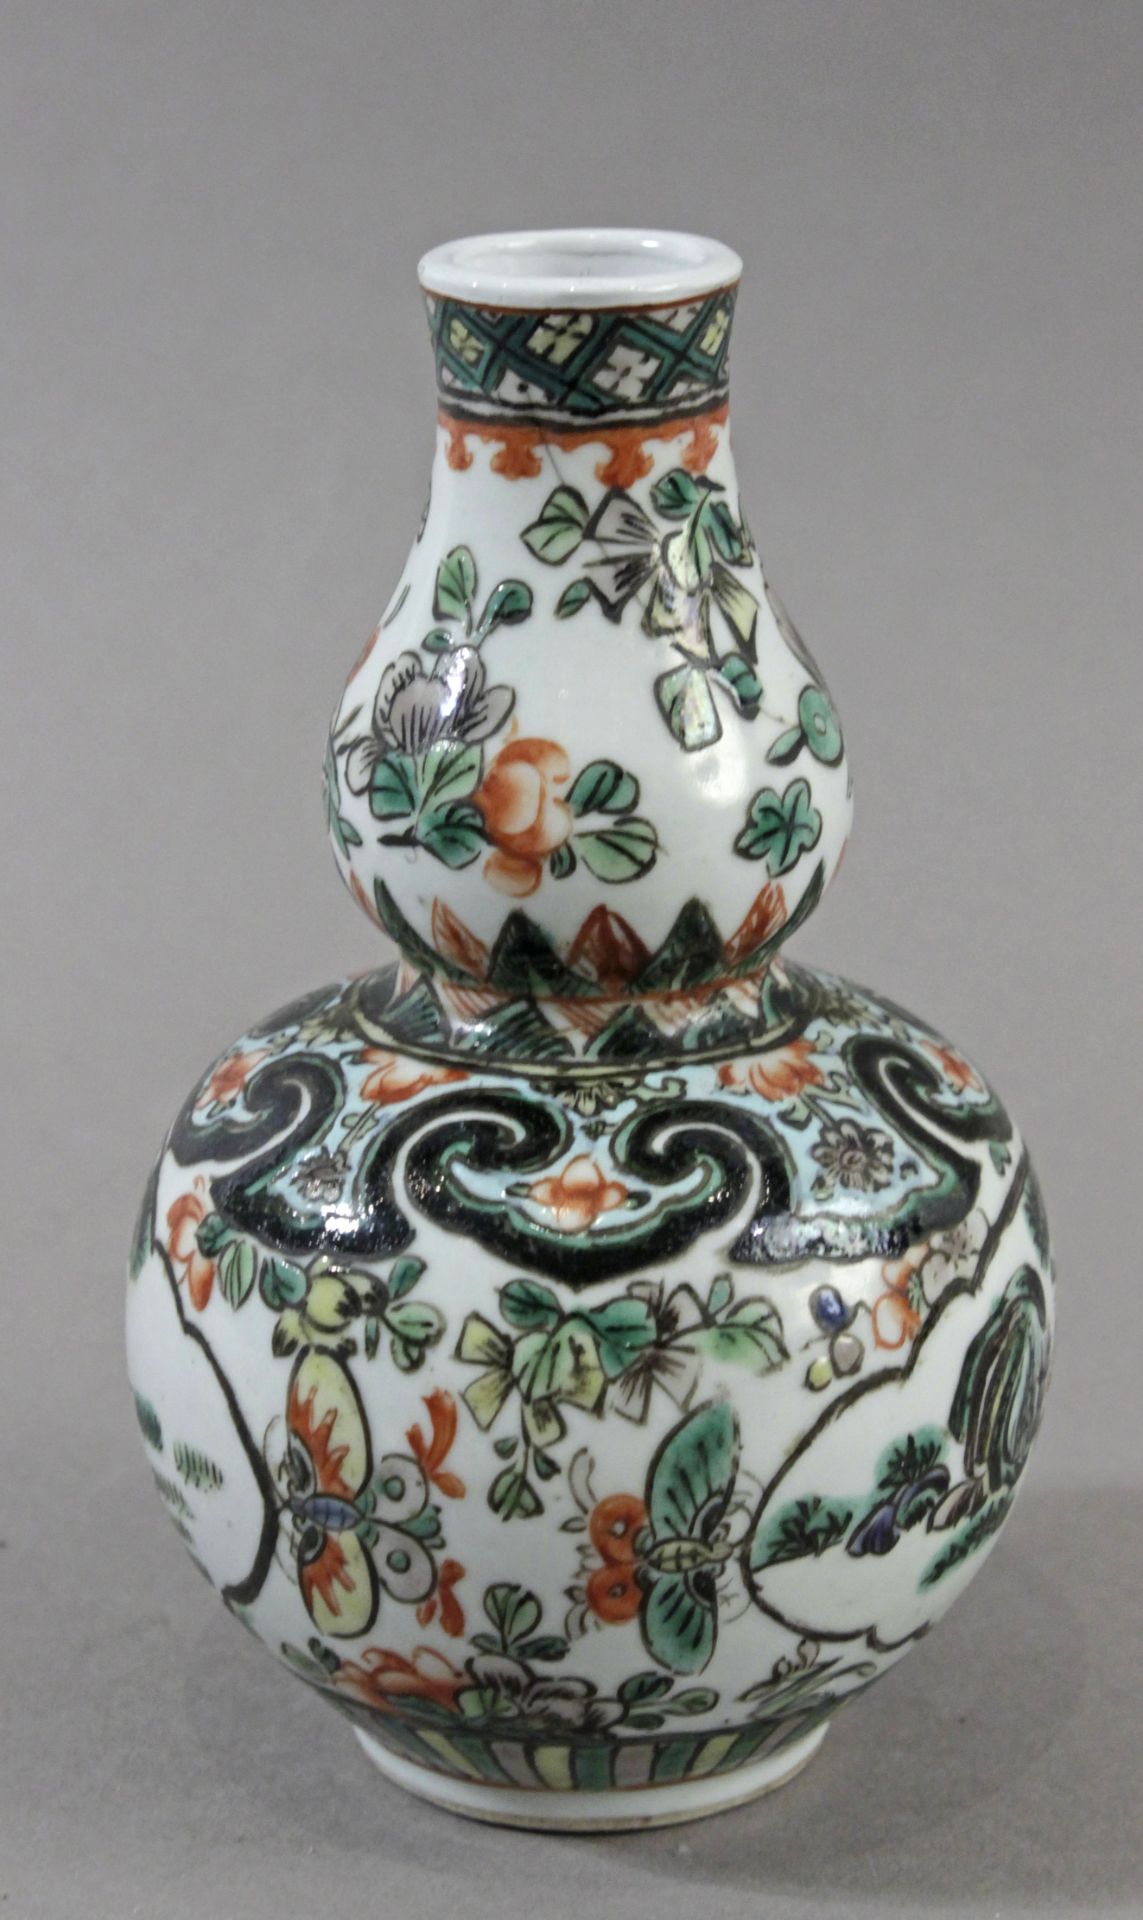 A 19th Chinese miniature vase in Famille Verte Kangxi porcelain - Image 2 of 6